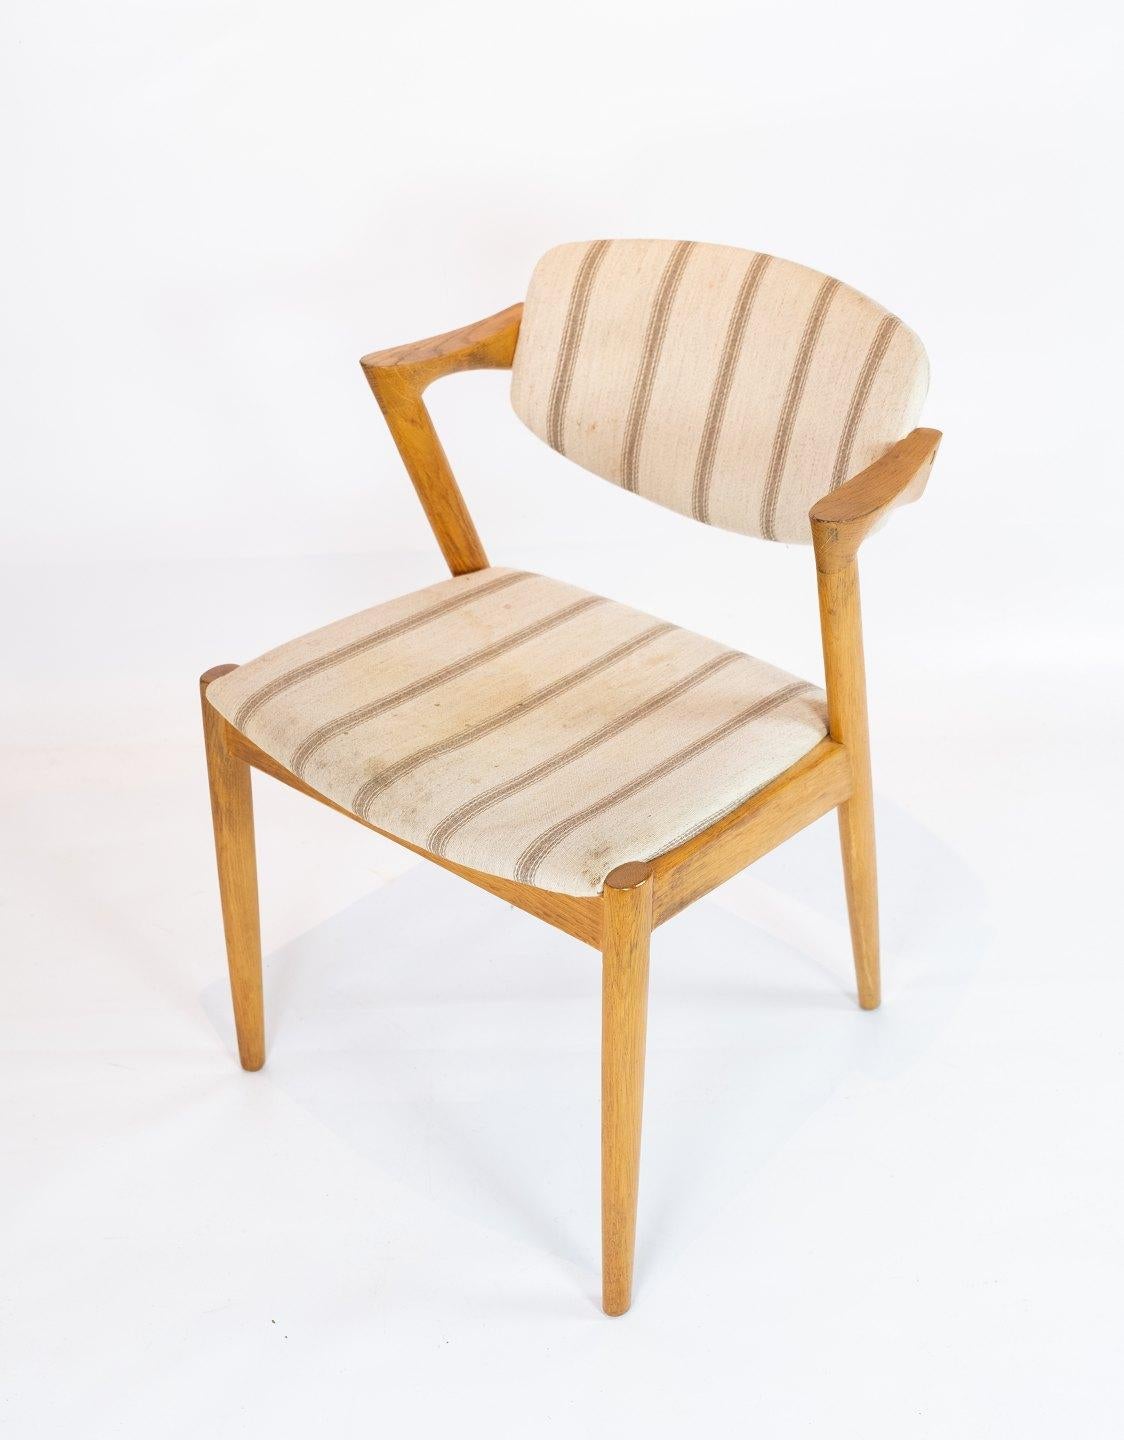 A set of 6 dining chairs, model 42, designed by Kai Kristiansen and manufactured by Schou Andersen in the 1960s. The chairs are of oak and upholstered in light striped wool fabric. The chairs will be looked after by our workshop and reupholstered if